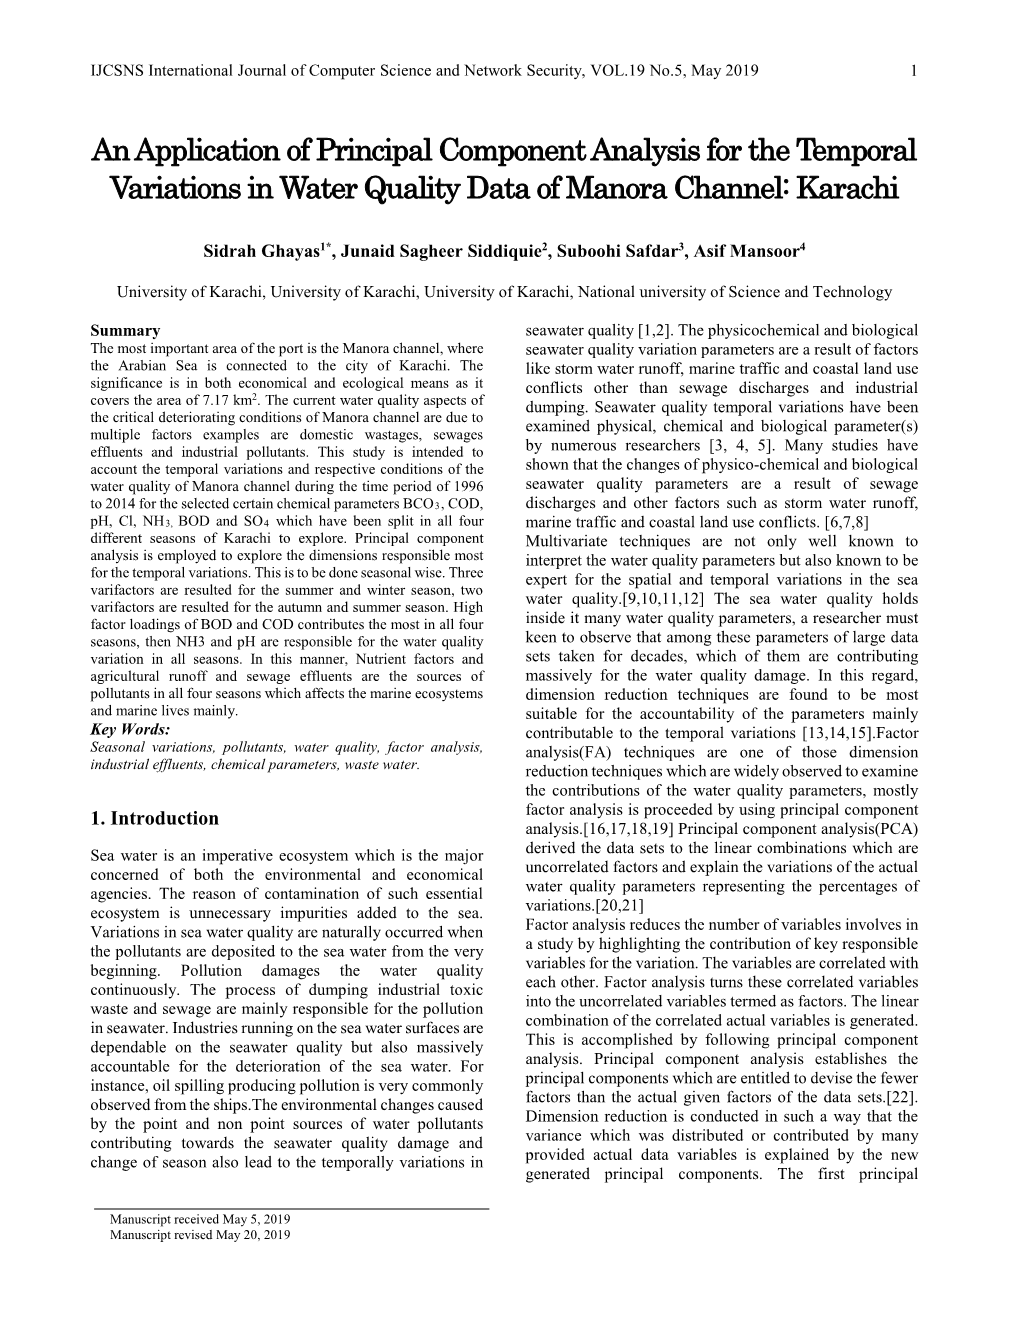 An Application of Principal Component Analysis for the Temporal Variations in Water Quality Data of Manora Channel: Karachi